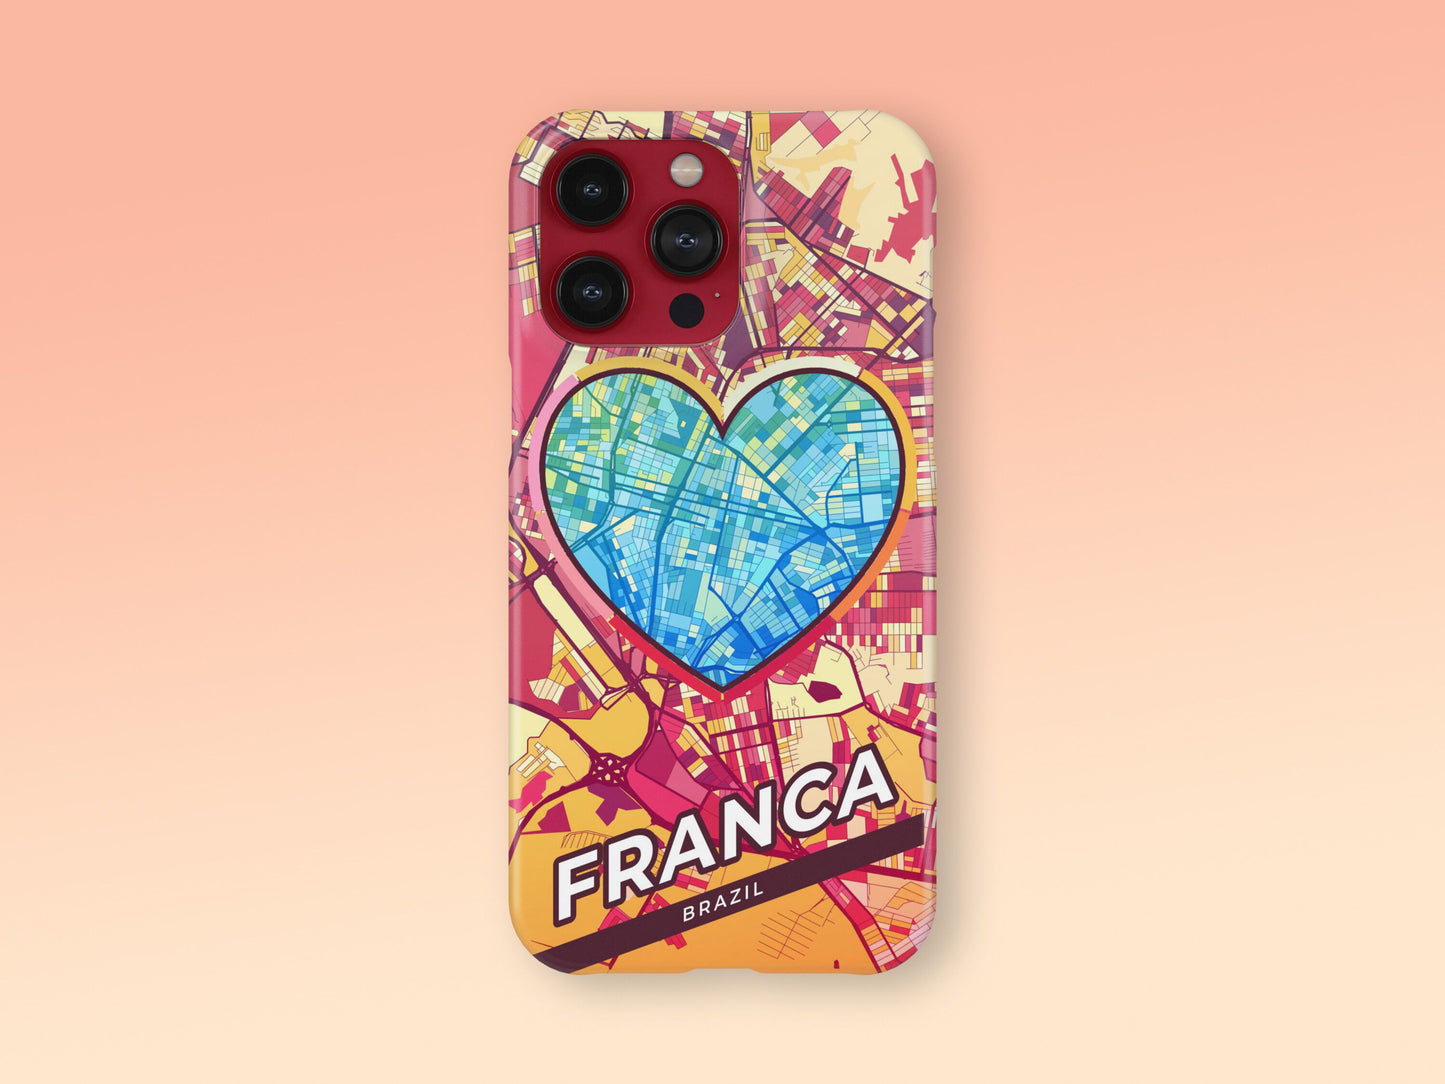 Franca Brazil slim phone case with colorful icon. Birthday, wedding or housewarming gift. Couple match cases. 2